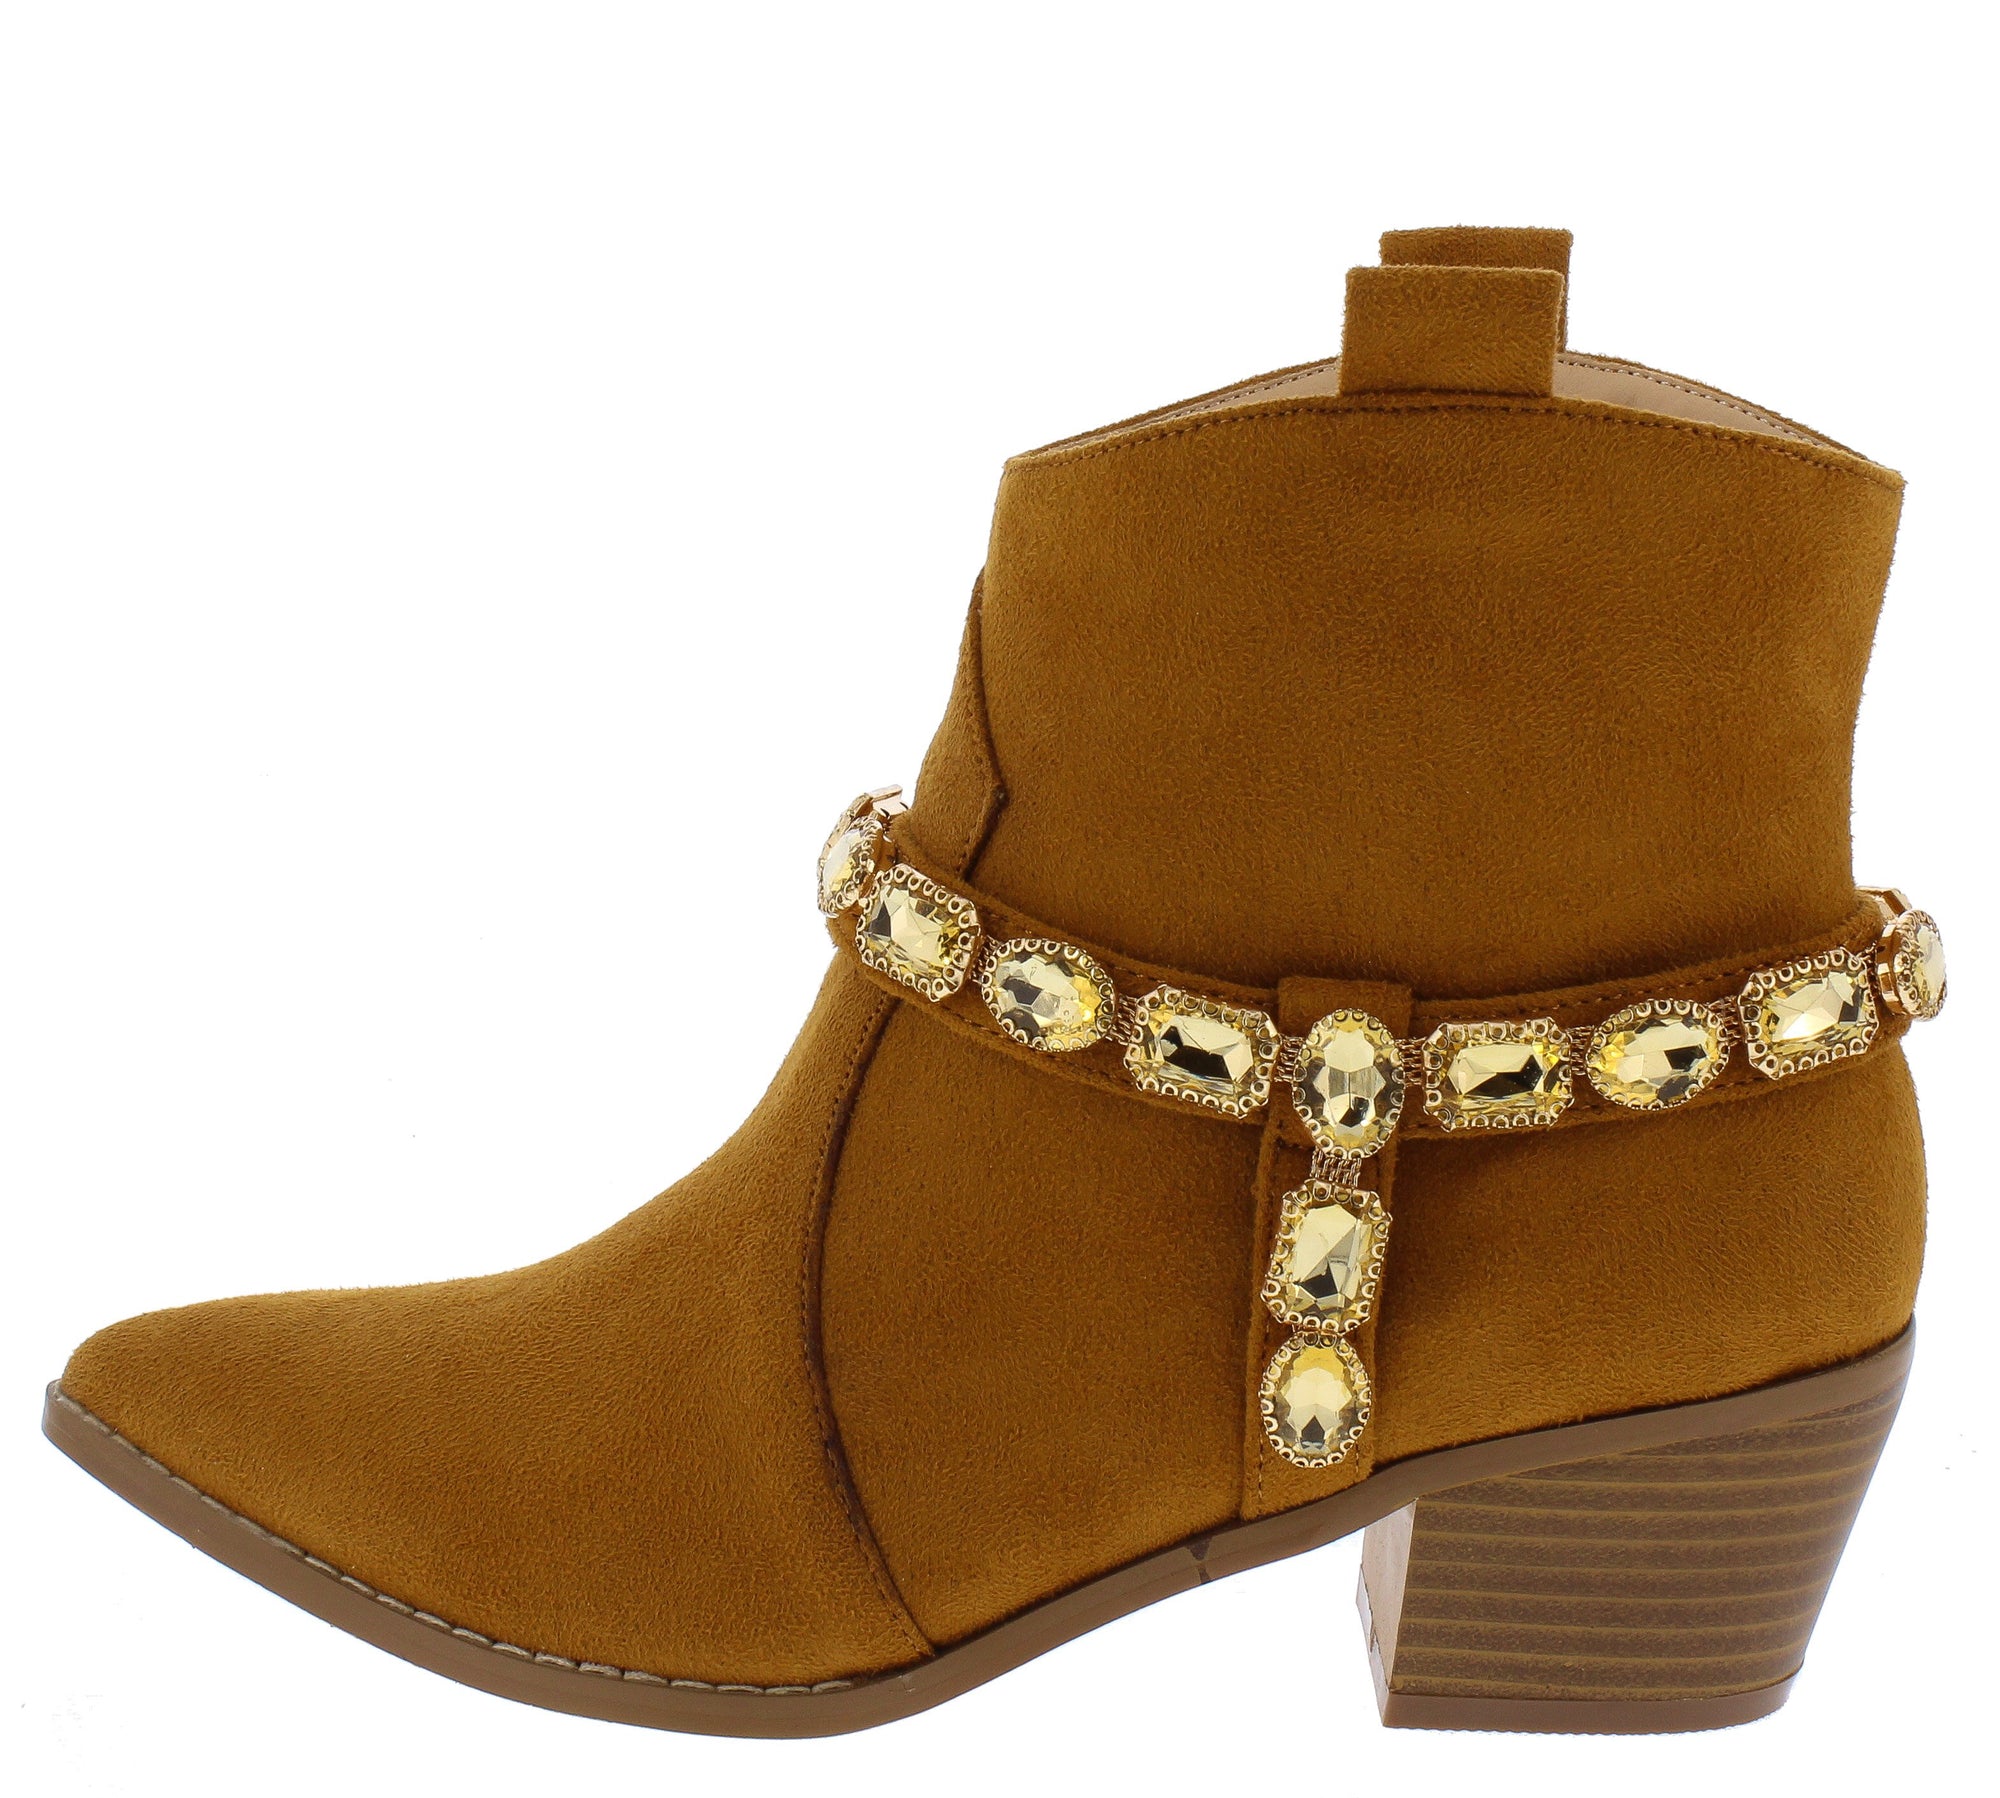 wholesale western boots